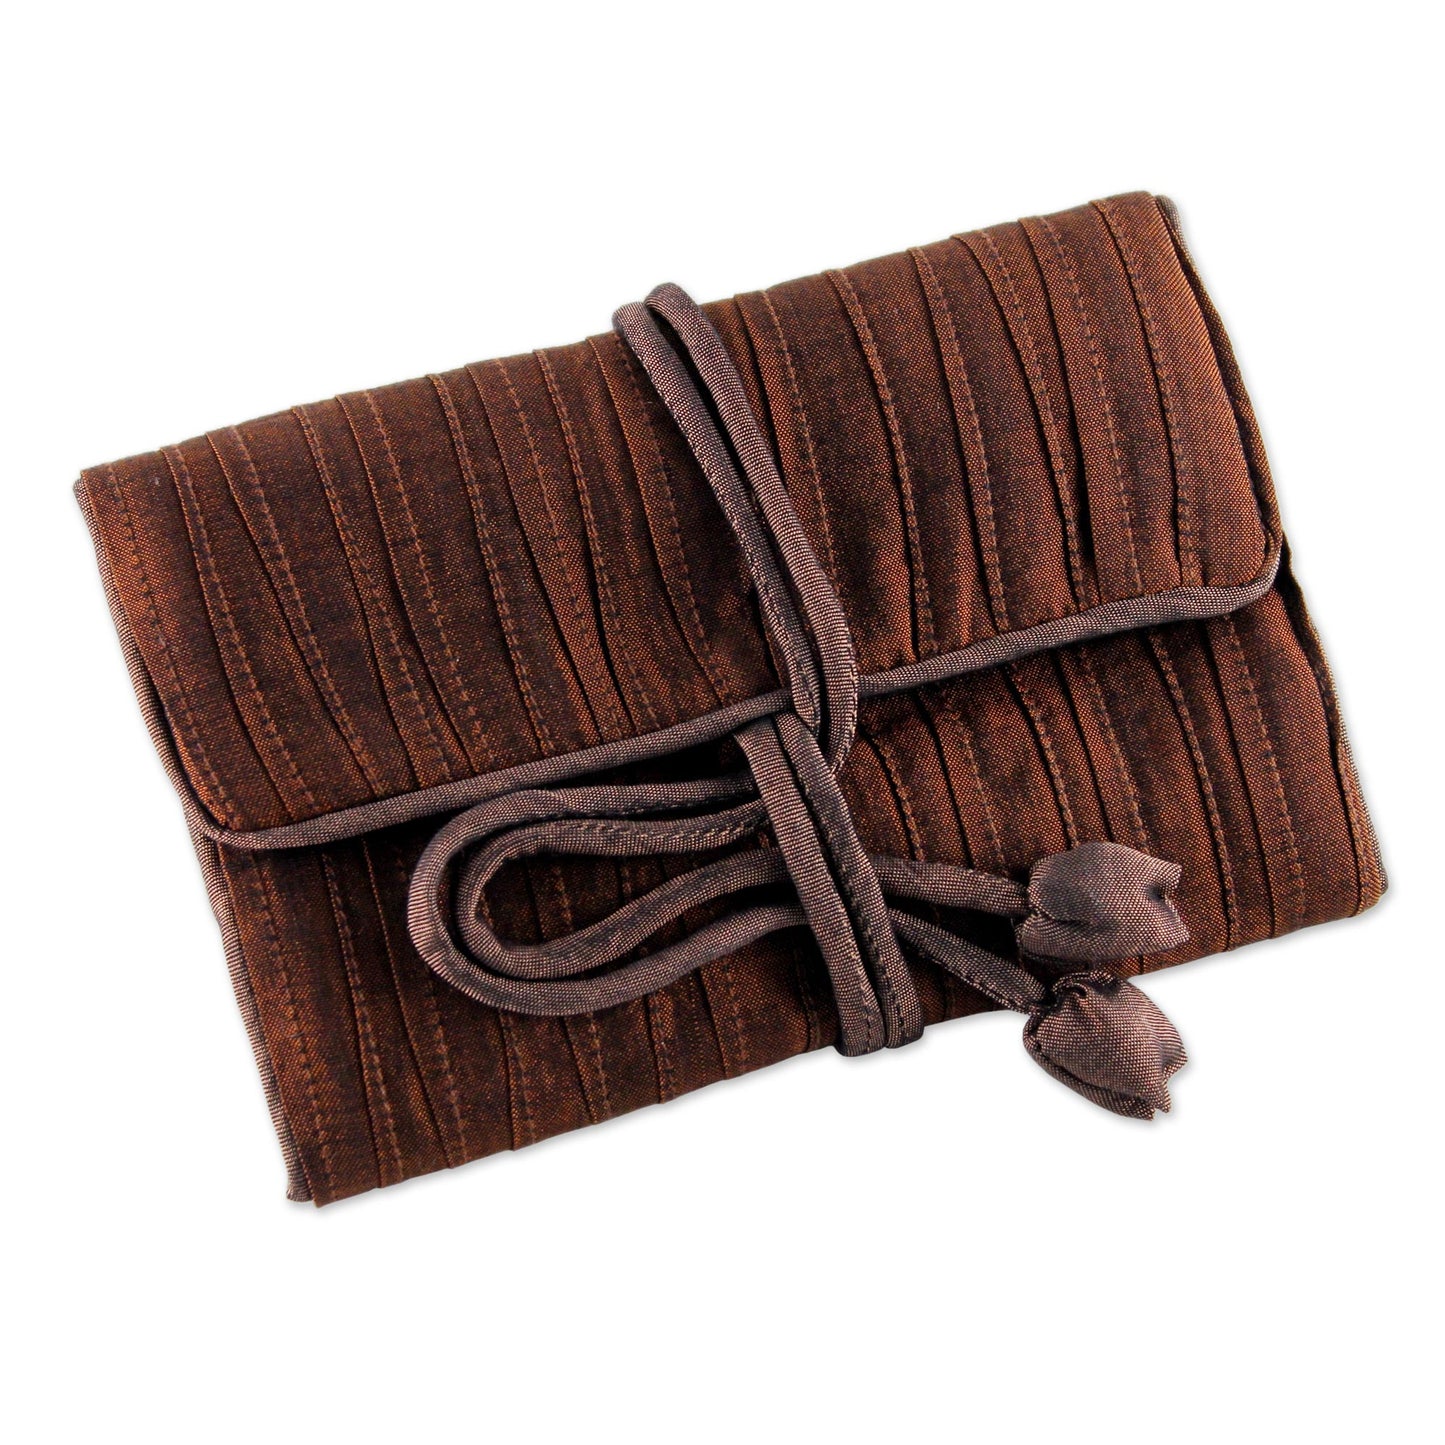 Enchanted Journey in Russet Hand Woven Silk and Rayon Blend Thai Jewelry Roll in Russet